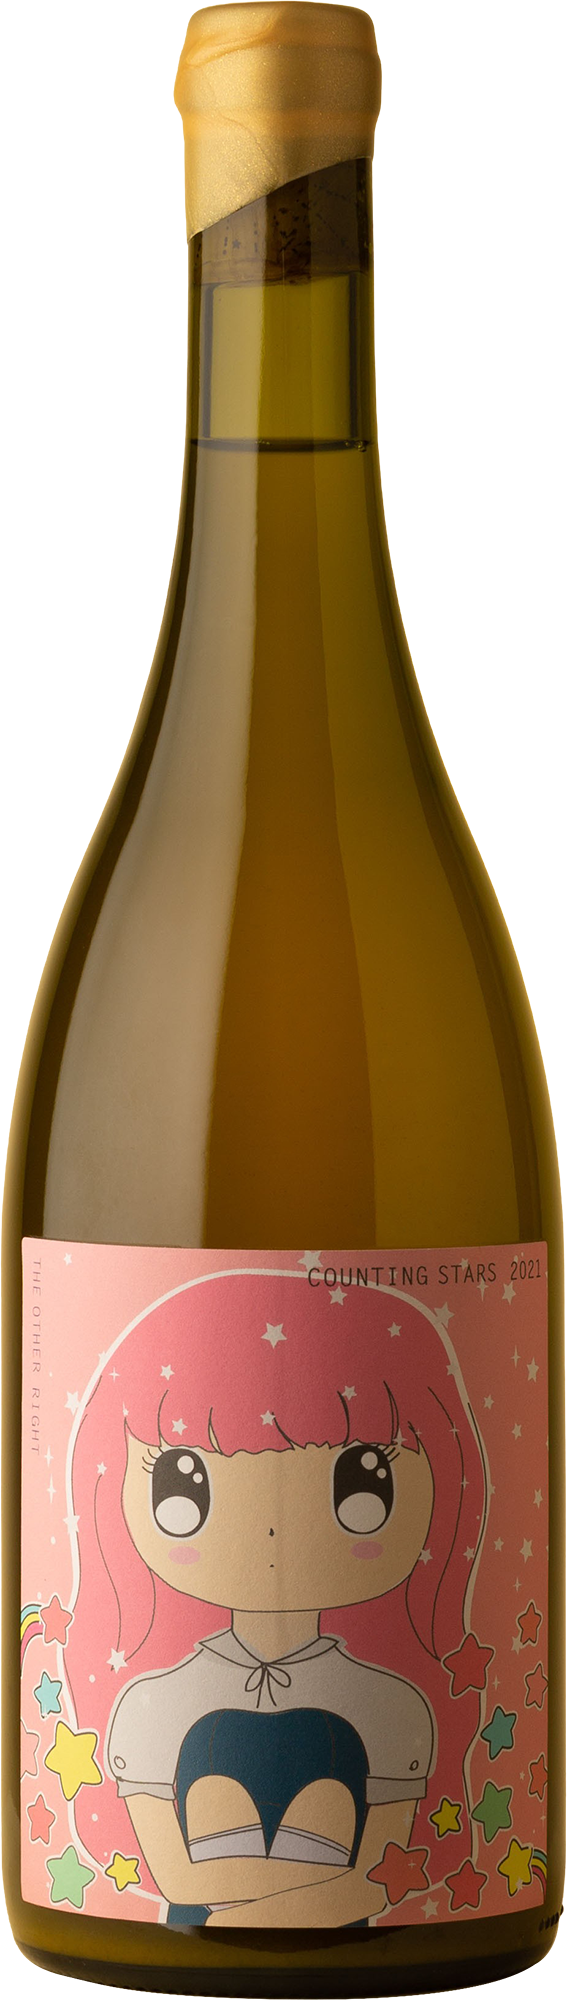 The Other Right - Counting Stars Chardonnay 2021 Orange Wine